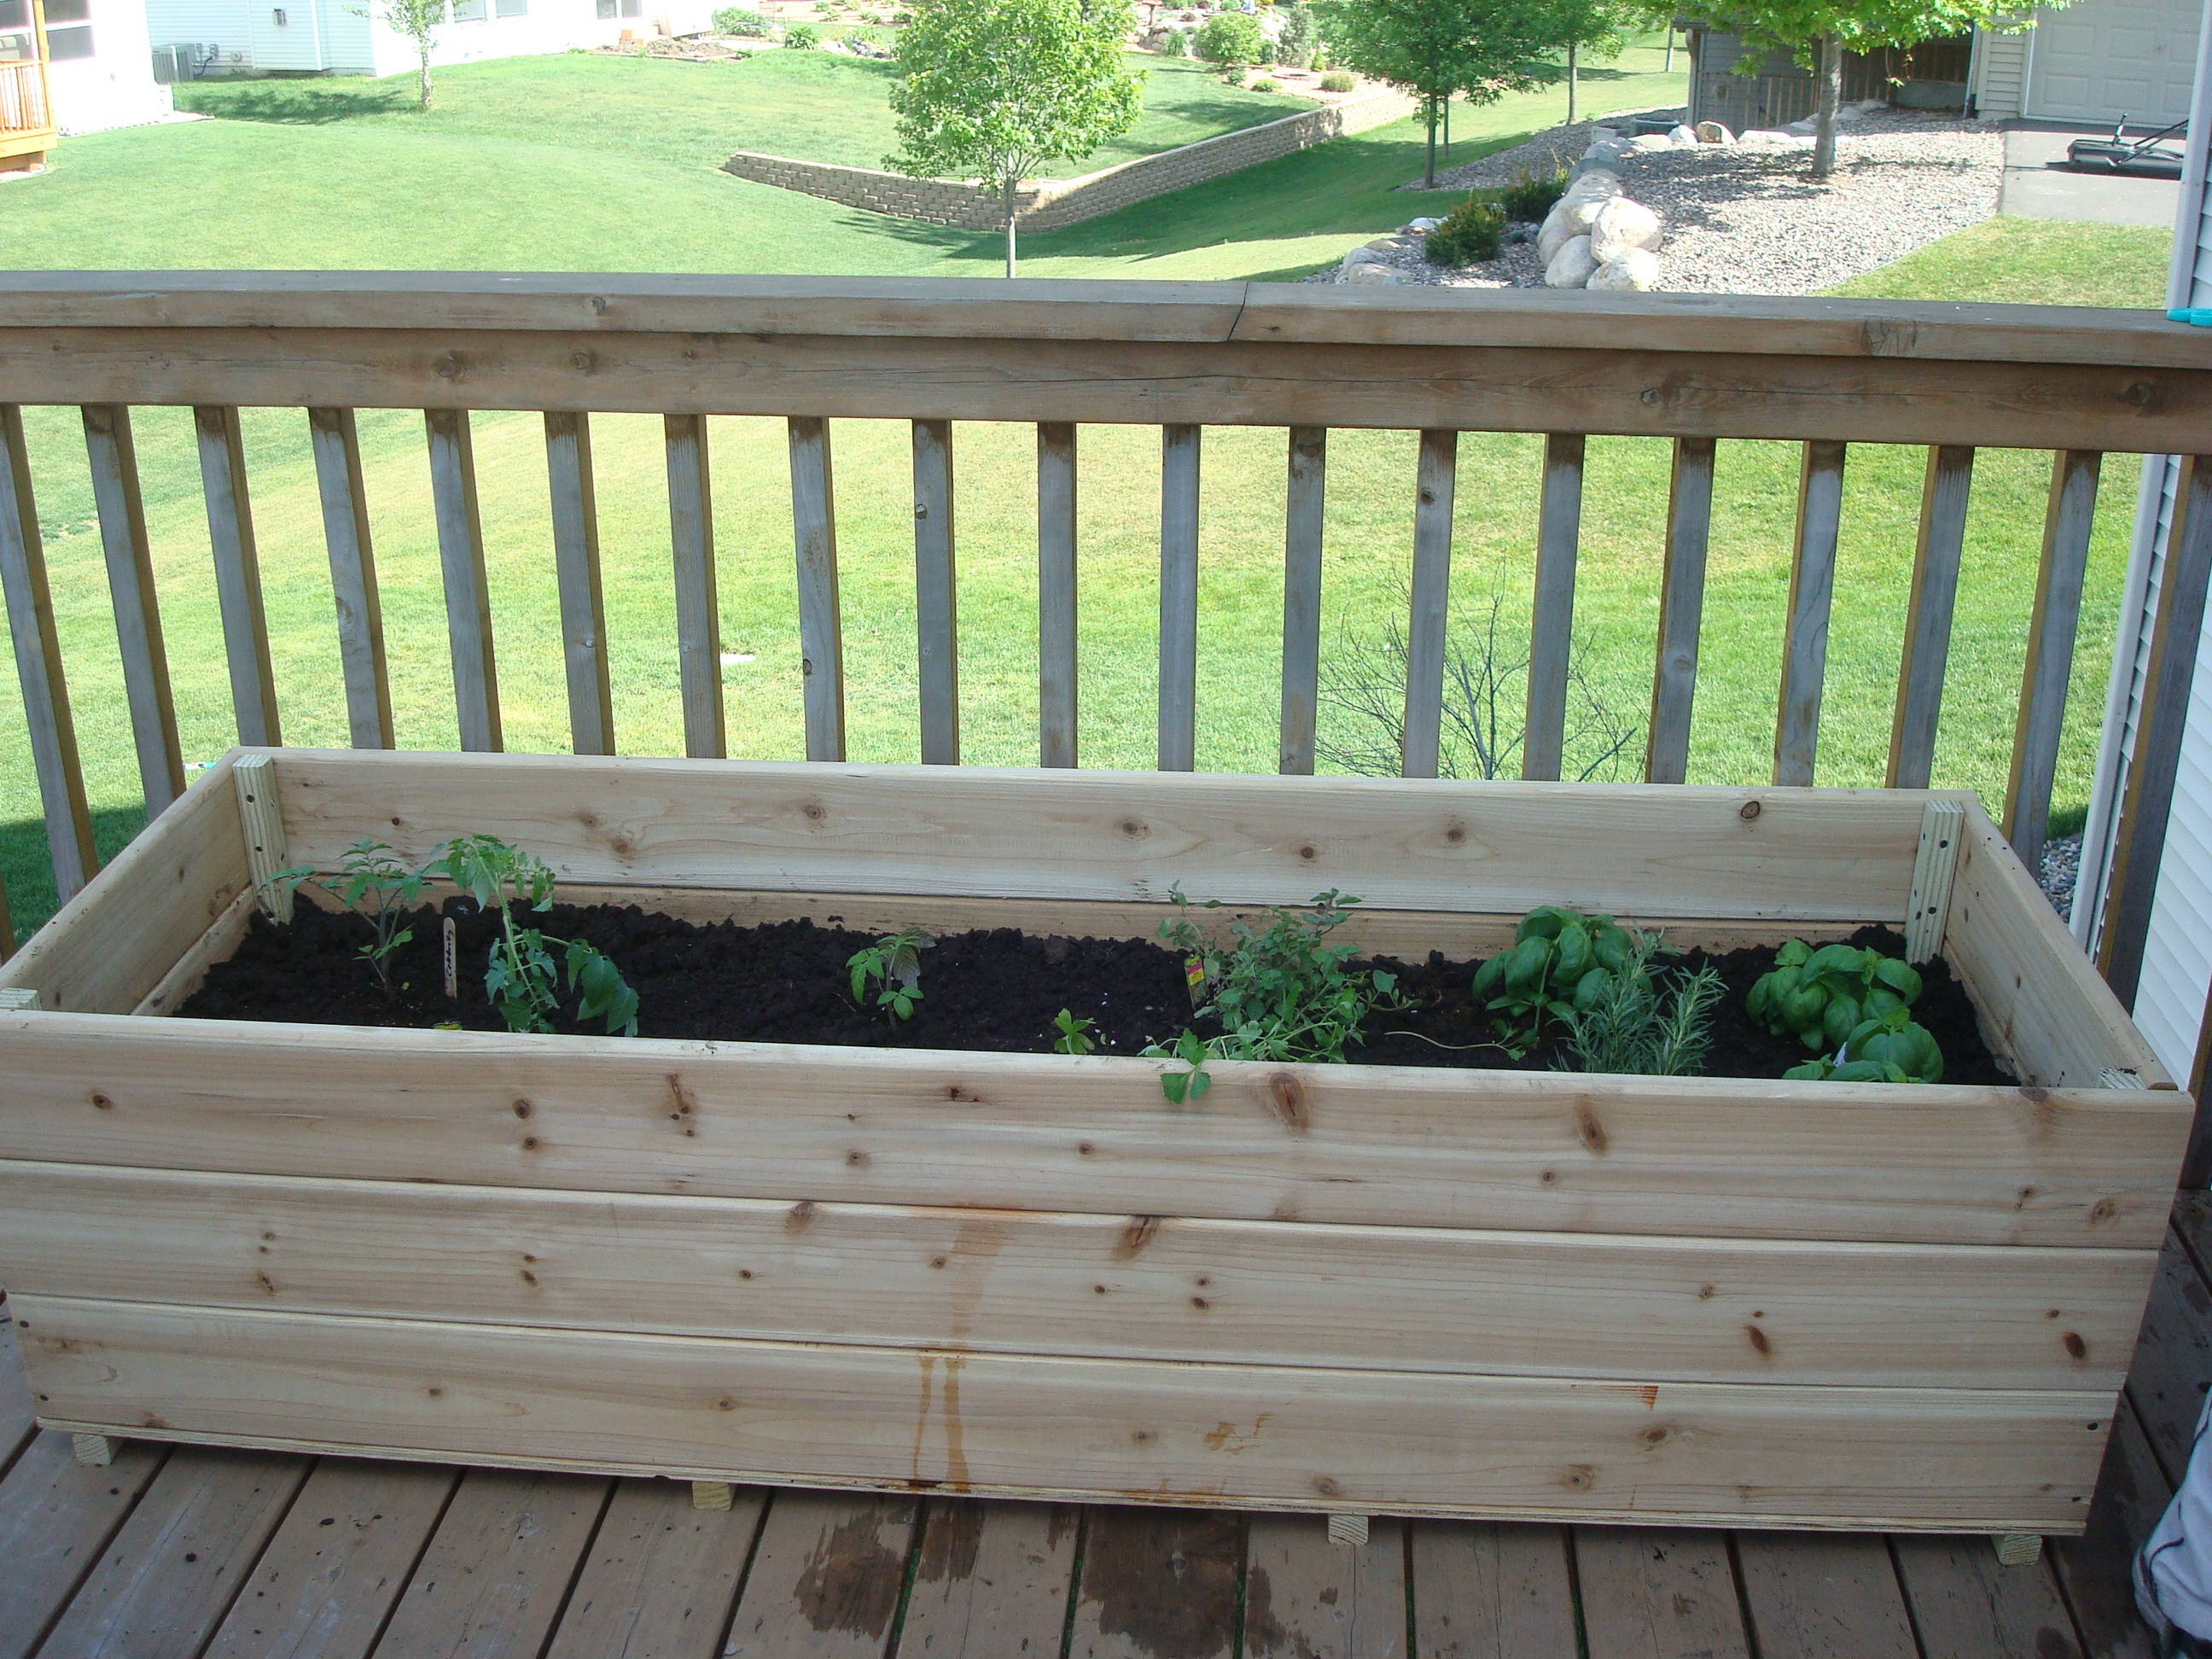 Vegetable Garden On The Deck You Bet My Northern Garden intended for sizing 2592 X 1944